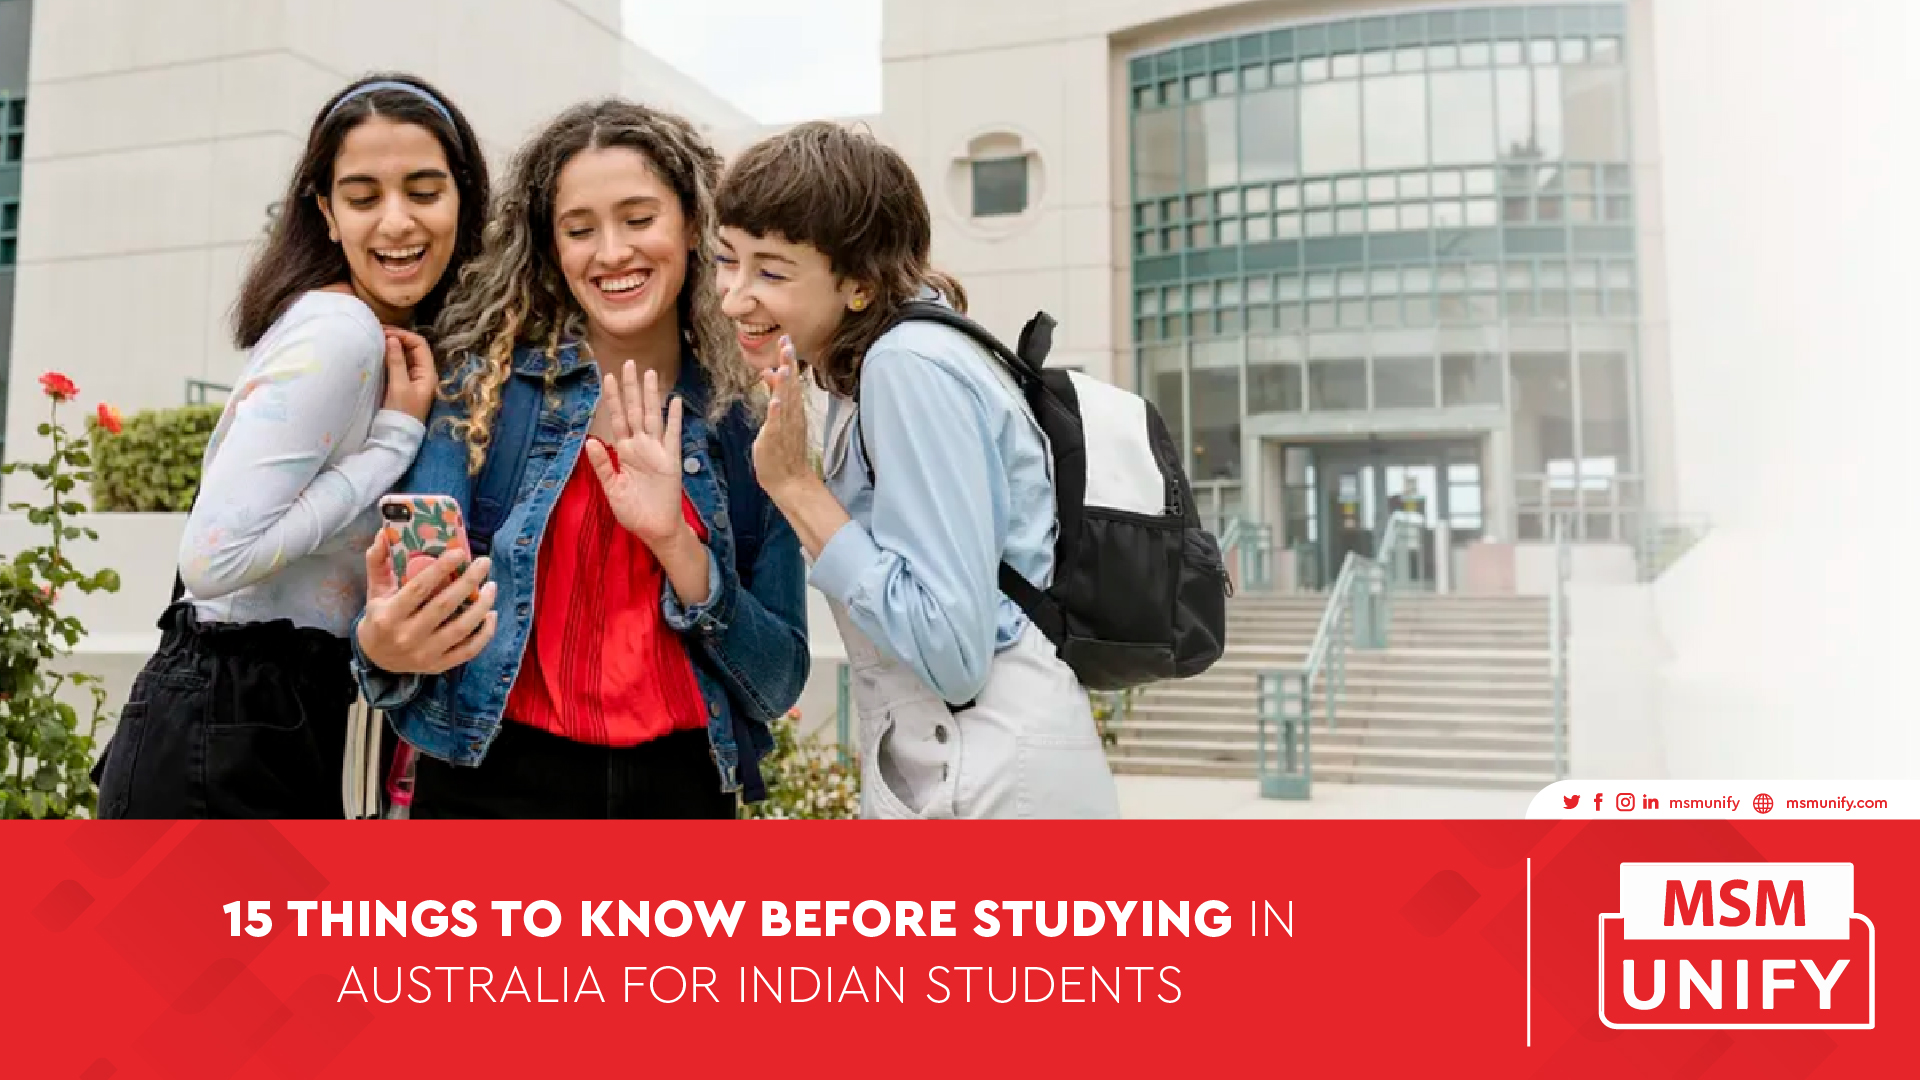 15 Things to Know Before Studying in Australia